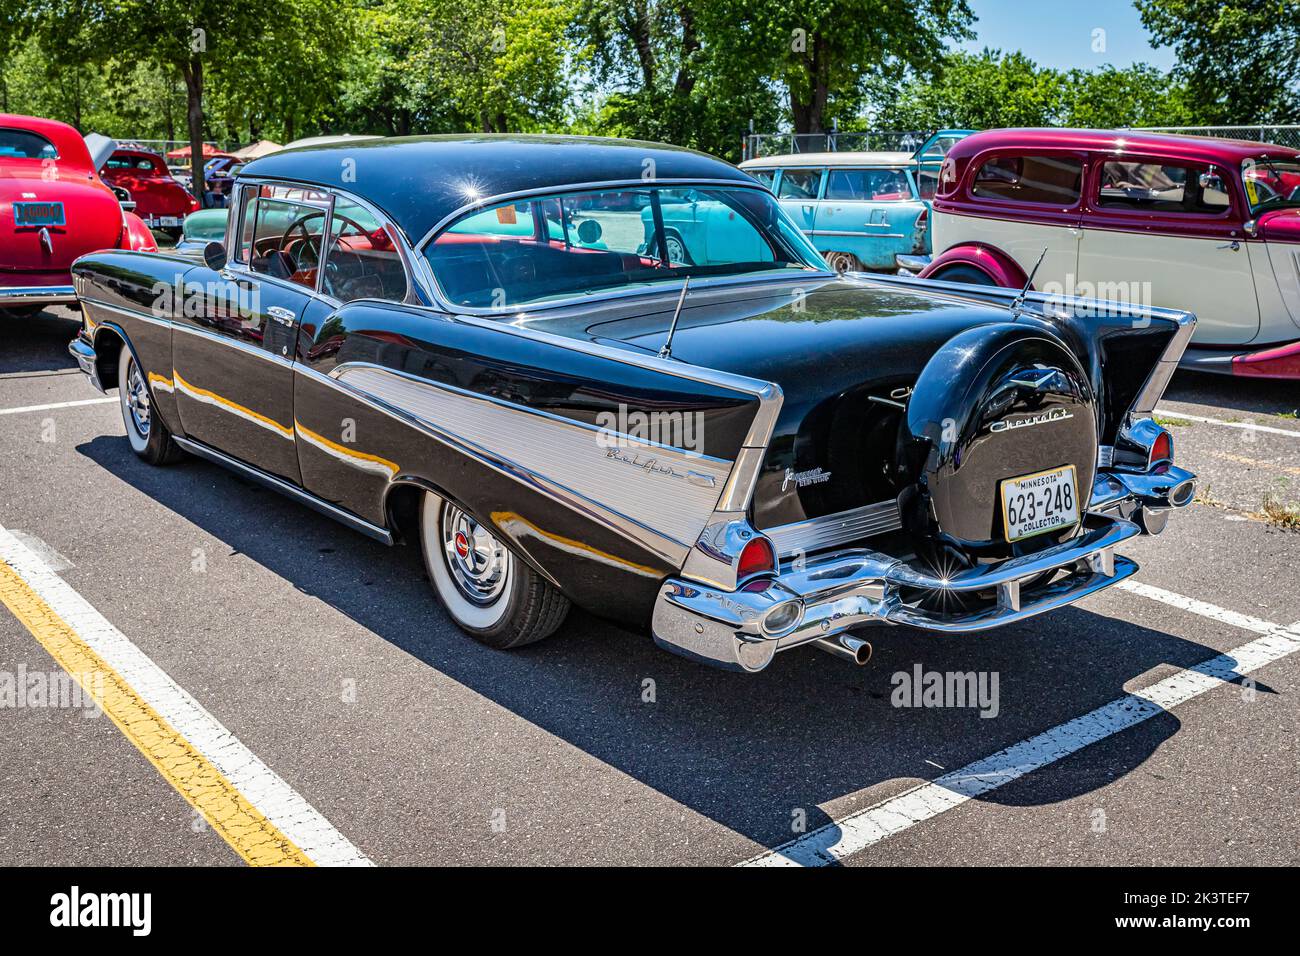 Falcon Heights, MN - June 18, 2022: High perspective rear corner view of a 1957 Chevrolet BelAir 2 Door Hardtop at a local car show. Stock Photo